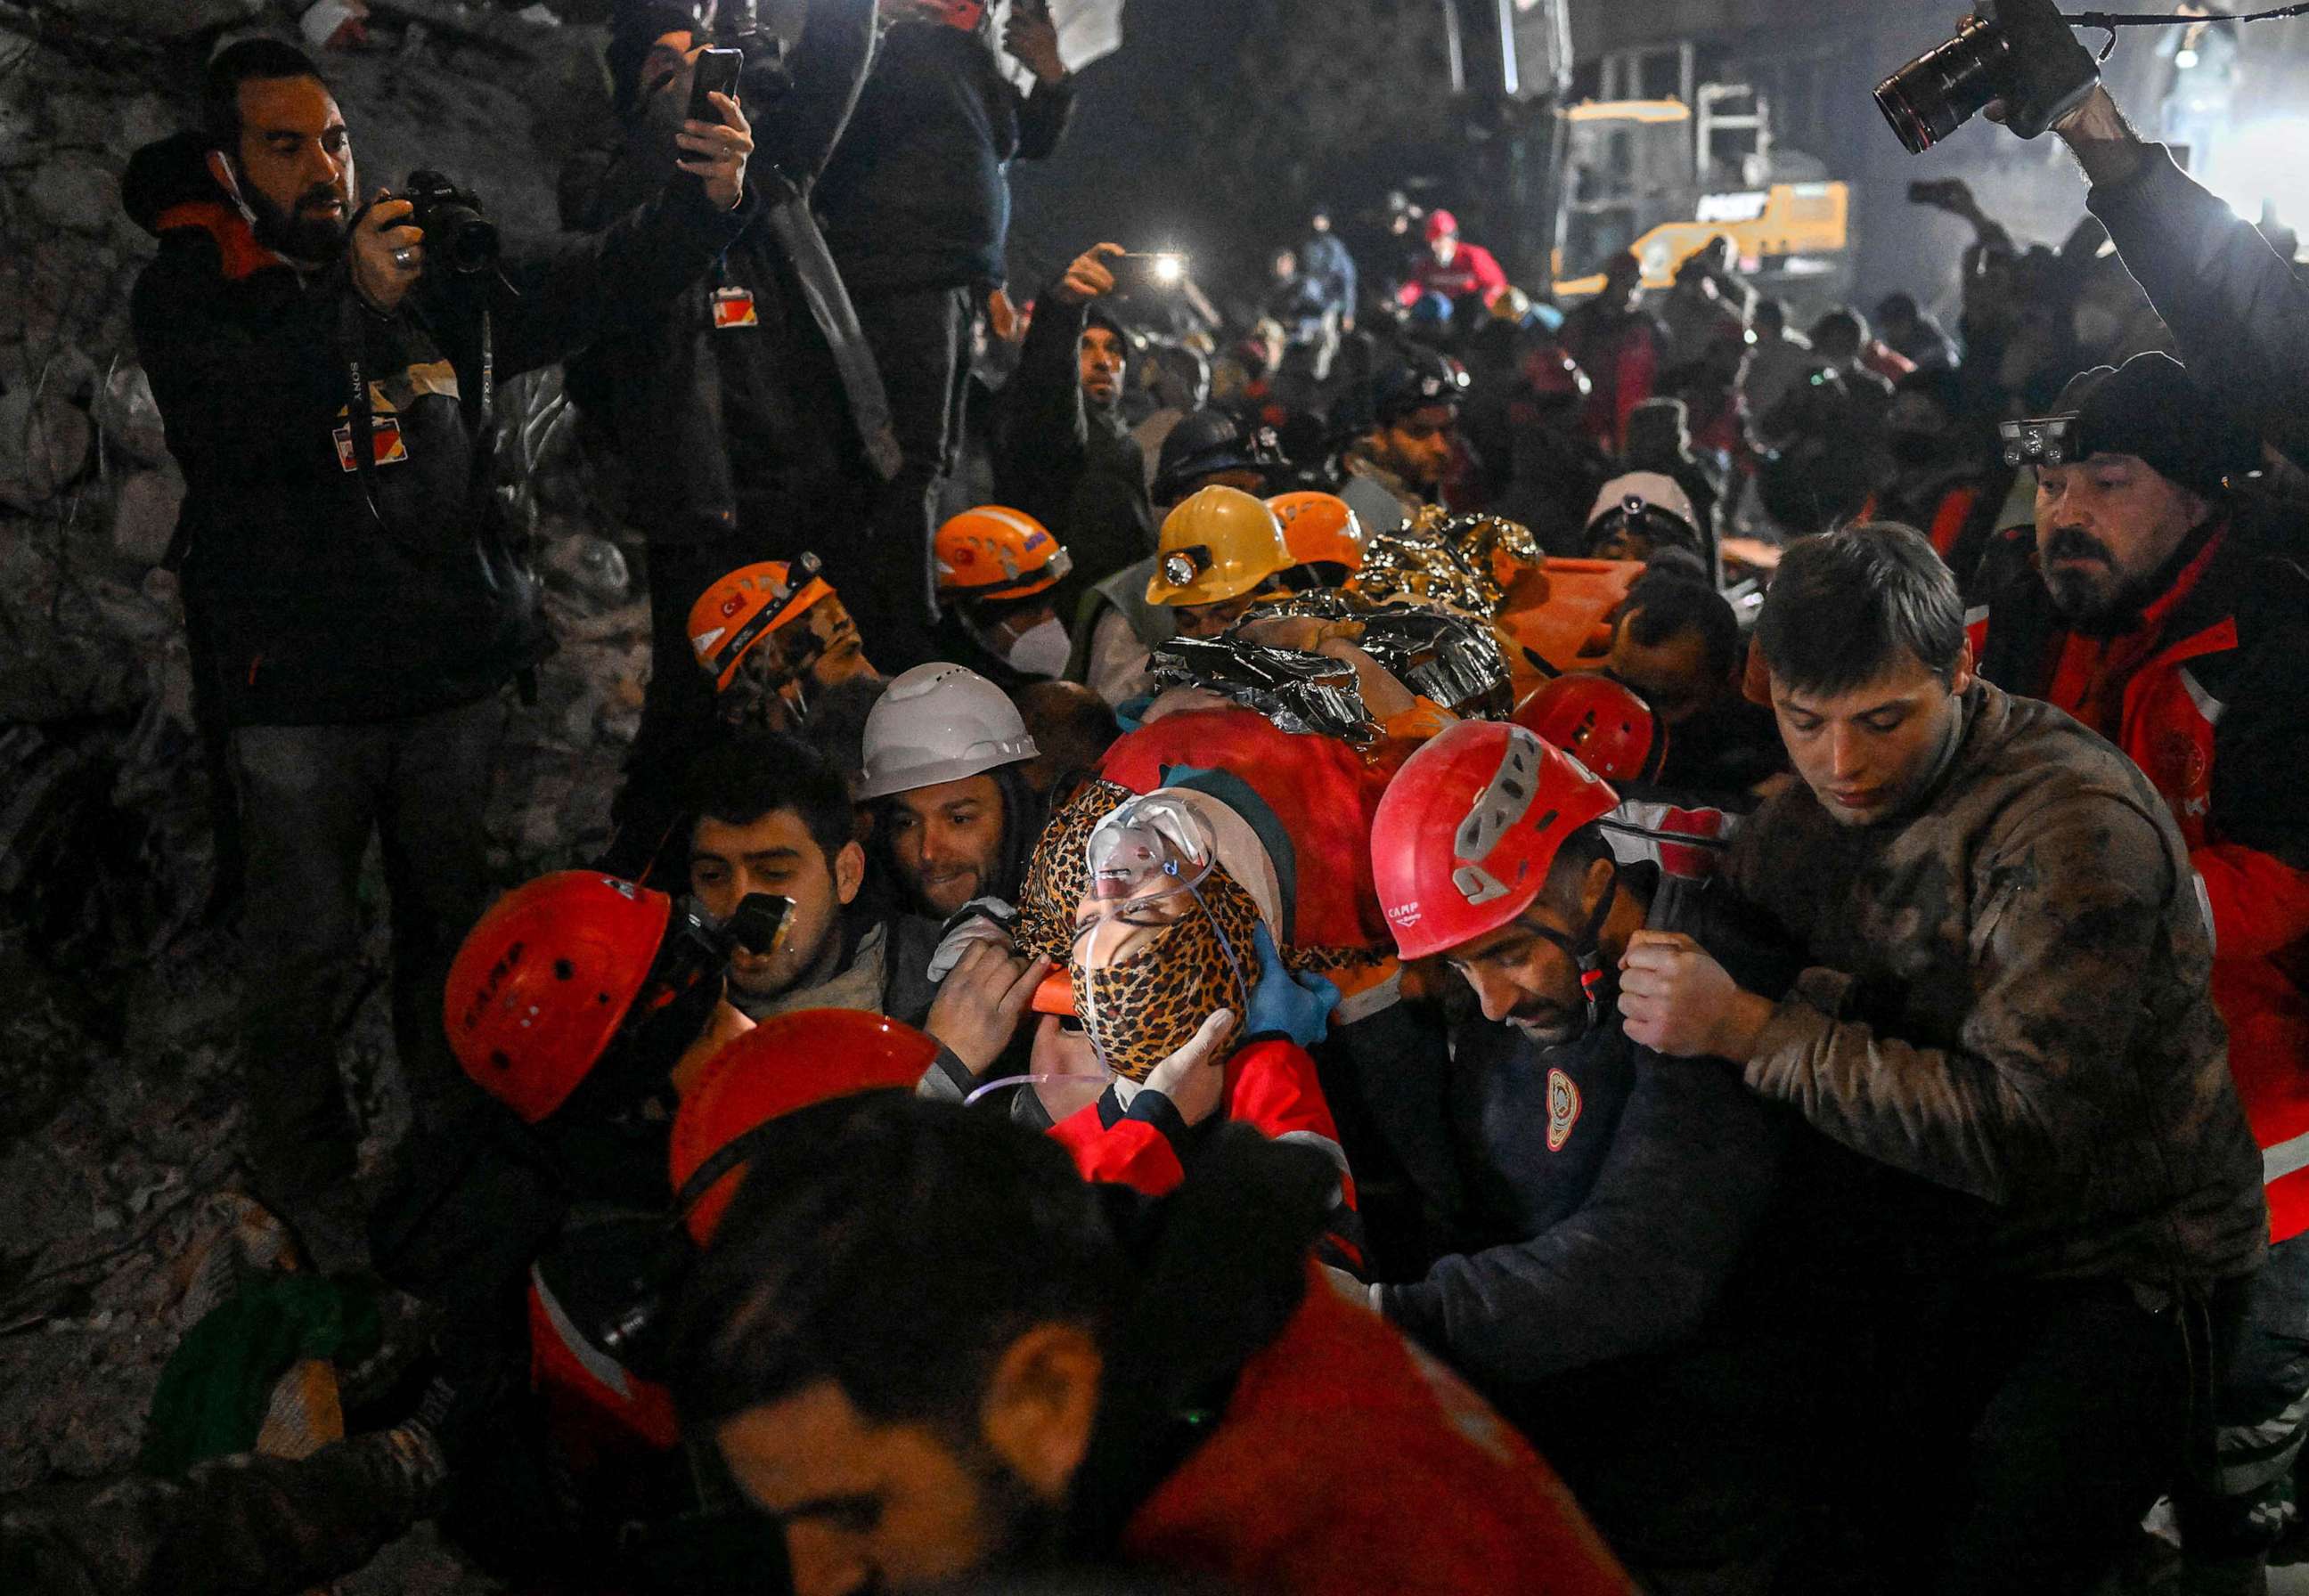 PHOTO: Seher, a 15 year-old Syrian woman saved by rescue workers from under the rubble after 210 hours, is carried to an ambulance in Hatay, southeastern Turkey, Feb. 14, 2023, a week after a deadly earthquake struck parts of Turkey and Syria.